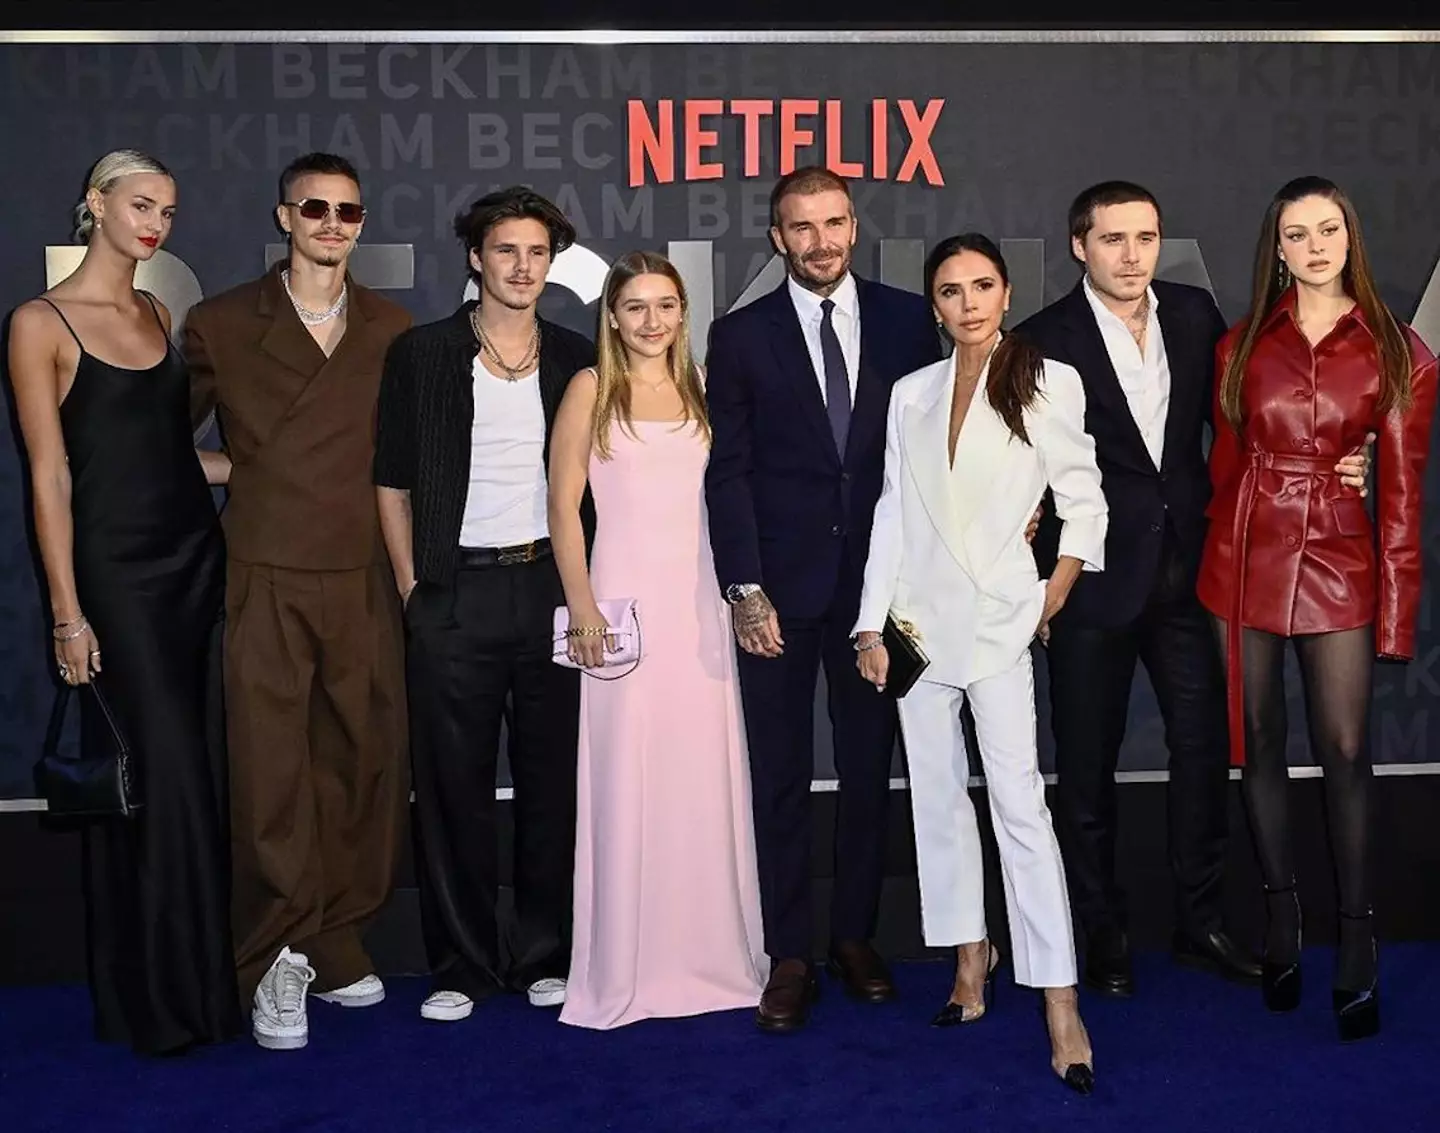 The Beckhams rocked up to support David at the new Netflix doc premiere yesterday.